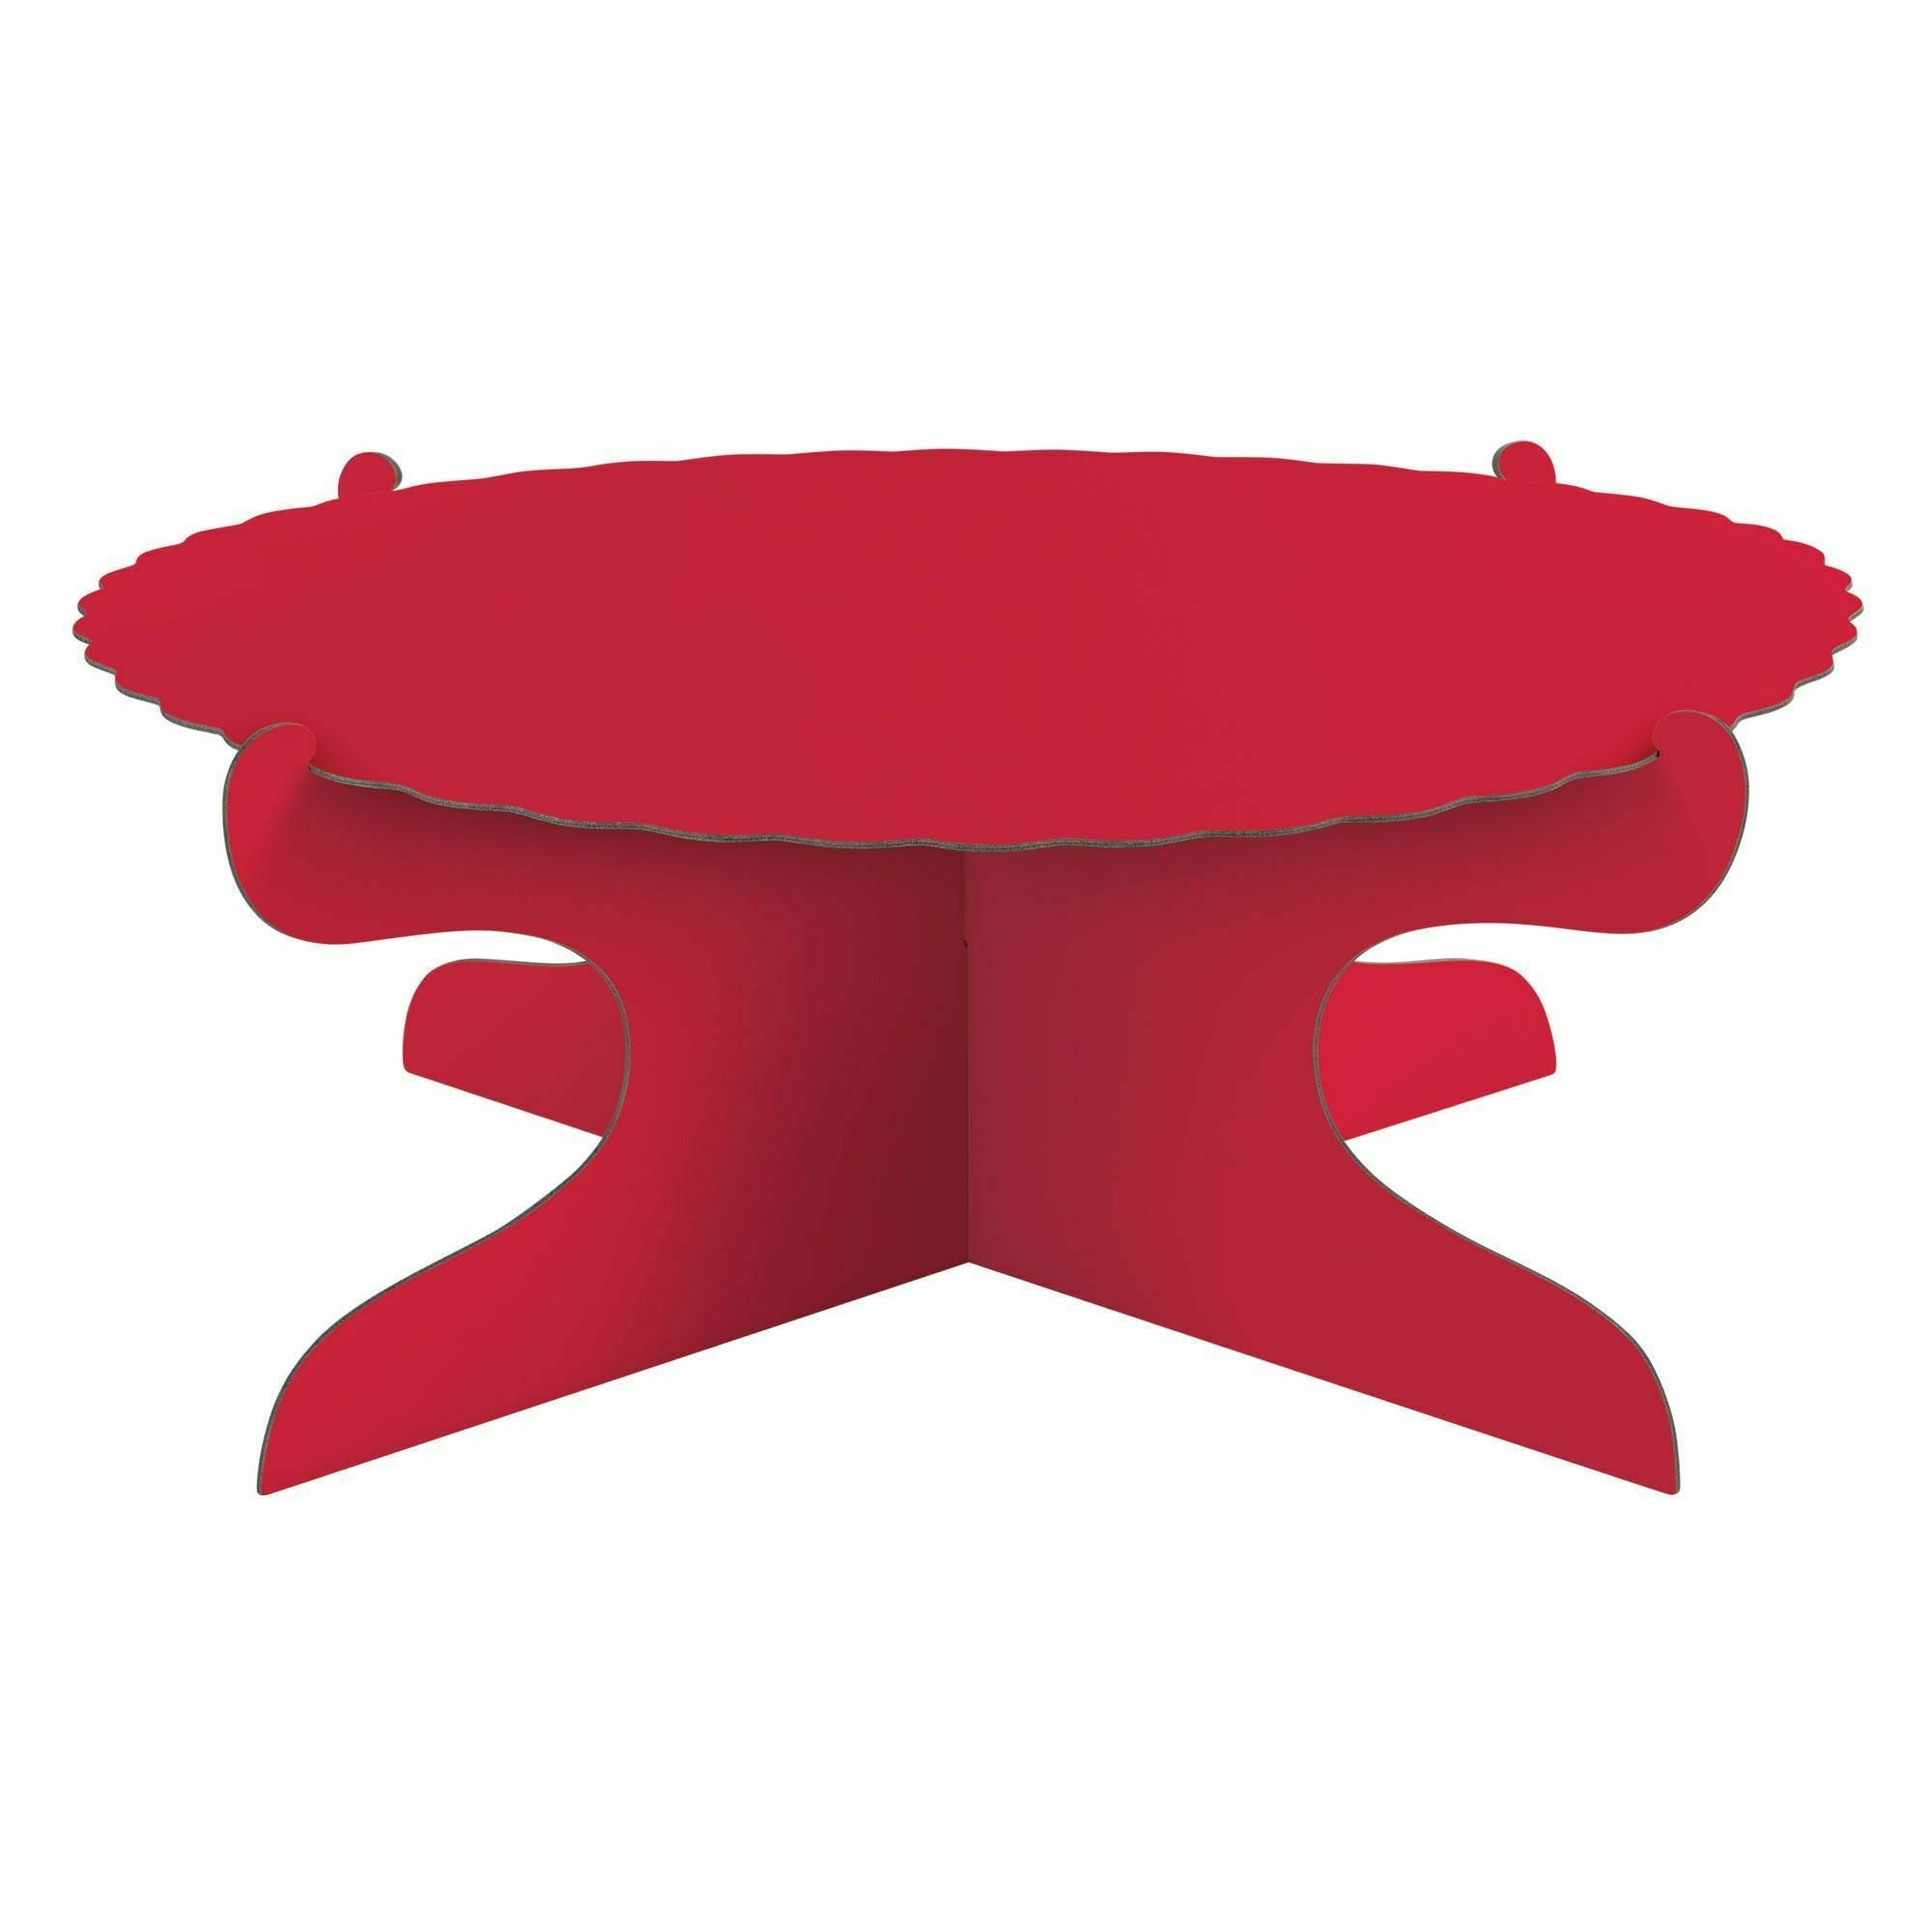 Amscan BASIC Cake Stands - Apple Red